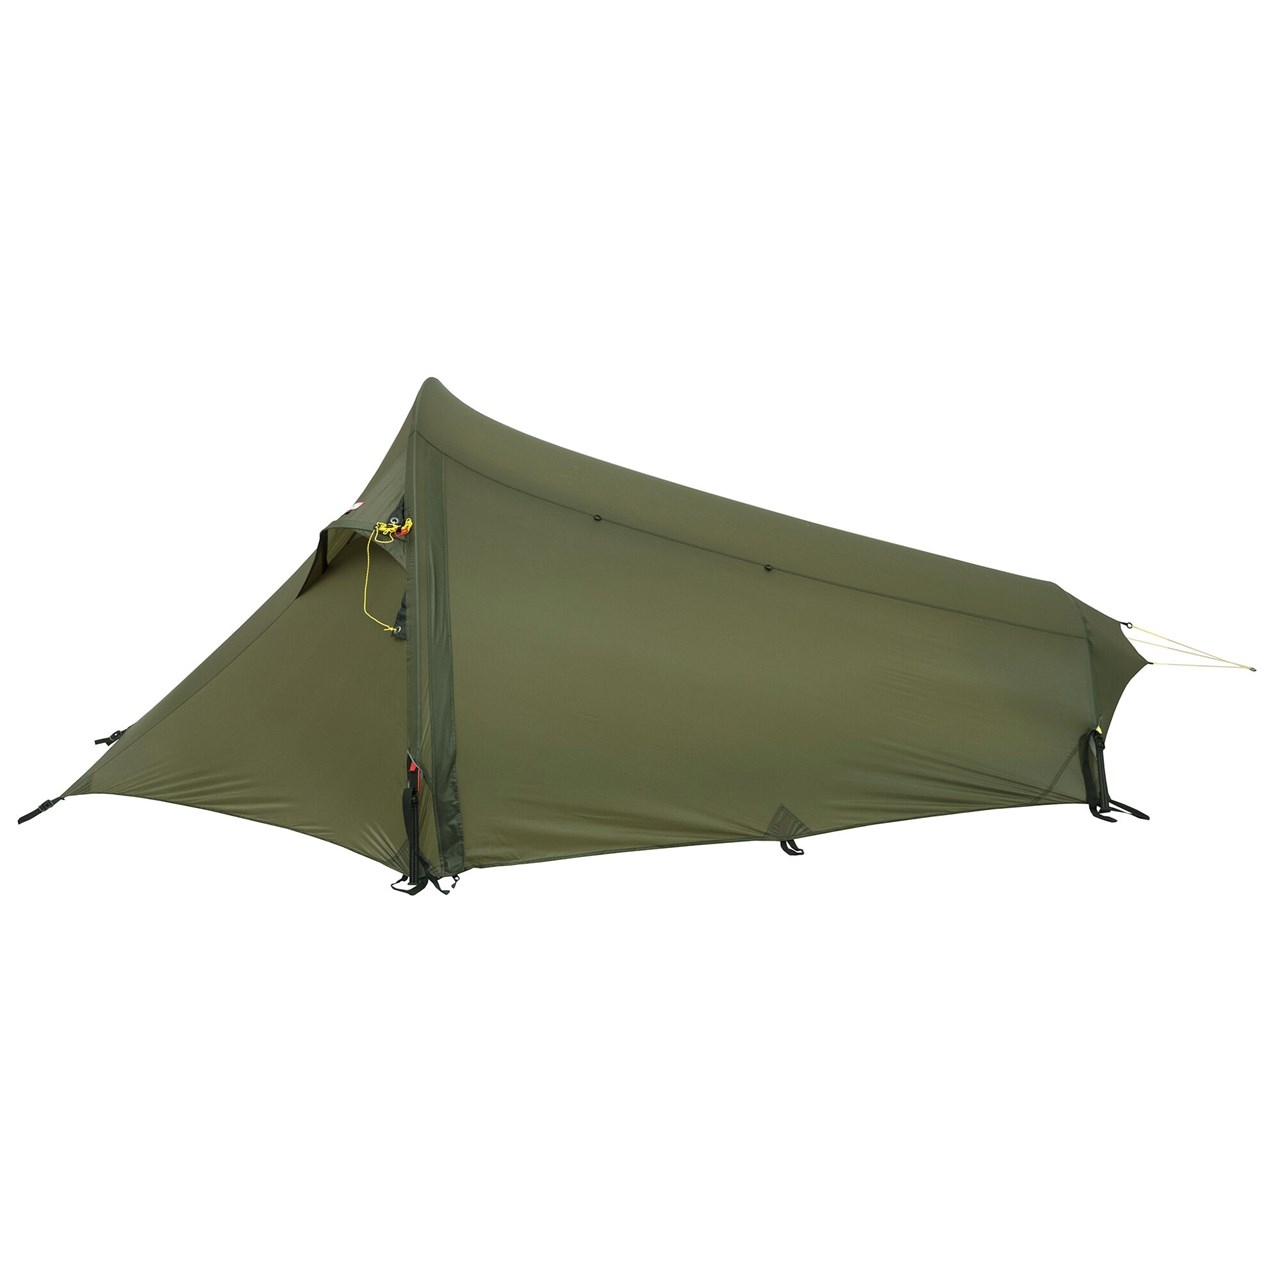 Picture of Helsport Ringstind Pro 2 Tent - green